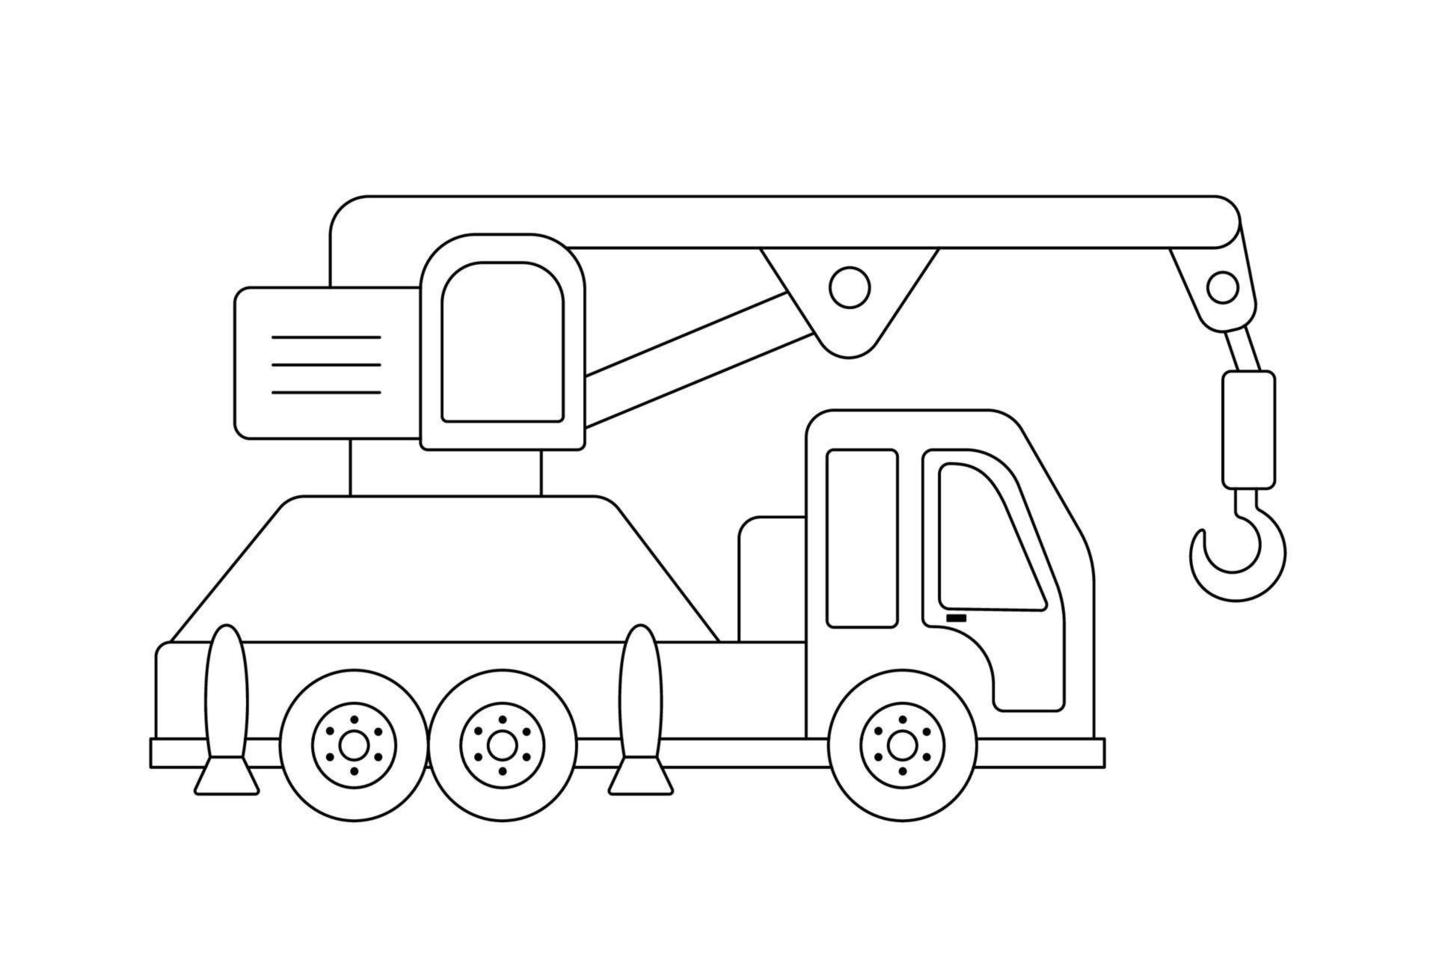 Construction crane. Outline illustration isolated on white background. Childish cute construction vehicle for coloring book vector